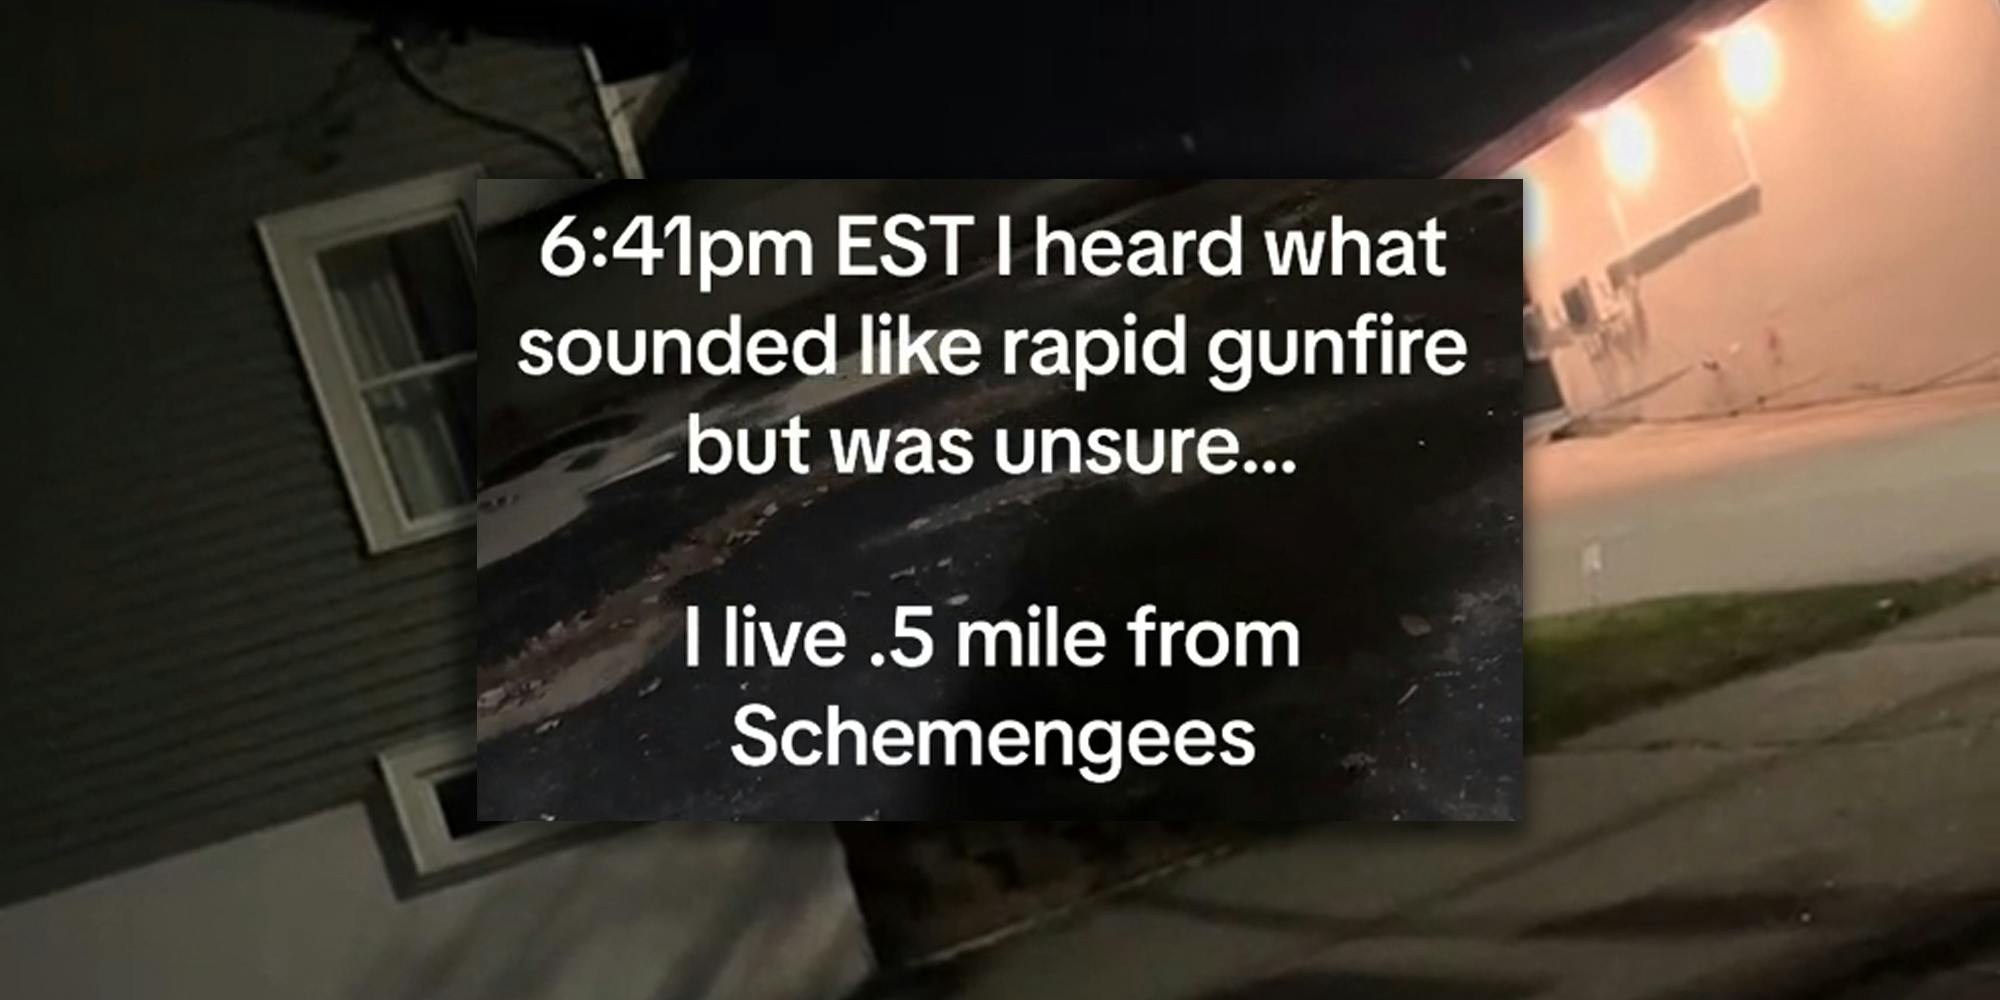 buildings and street (background) "6:41pm EST I heard what sounded like rapid gunfire but was unsure... I live .5 mile from Schemengees" (inset)